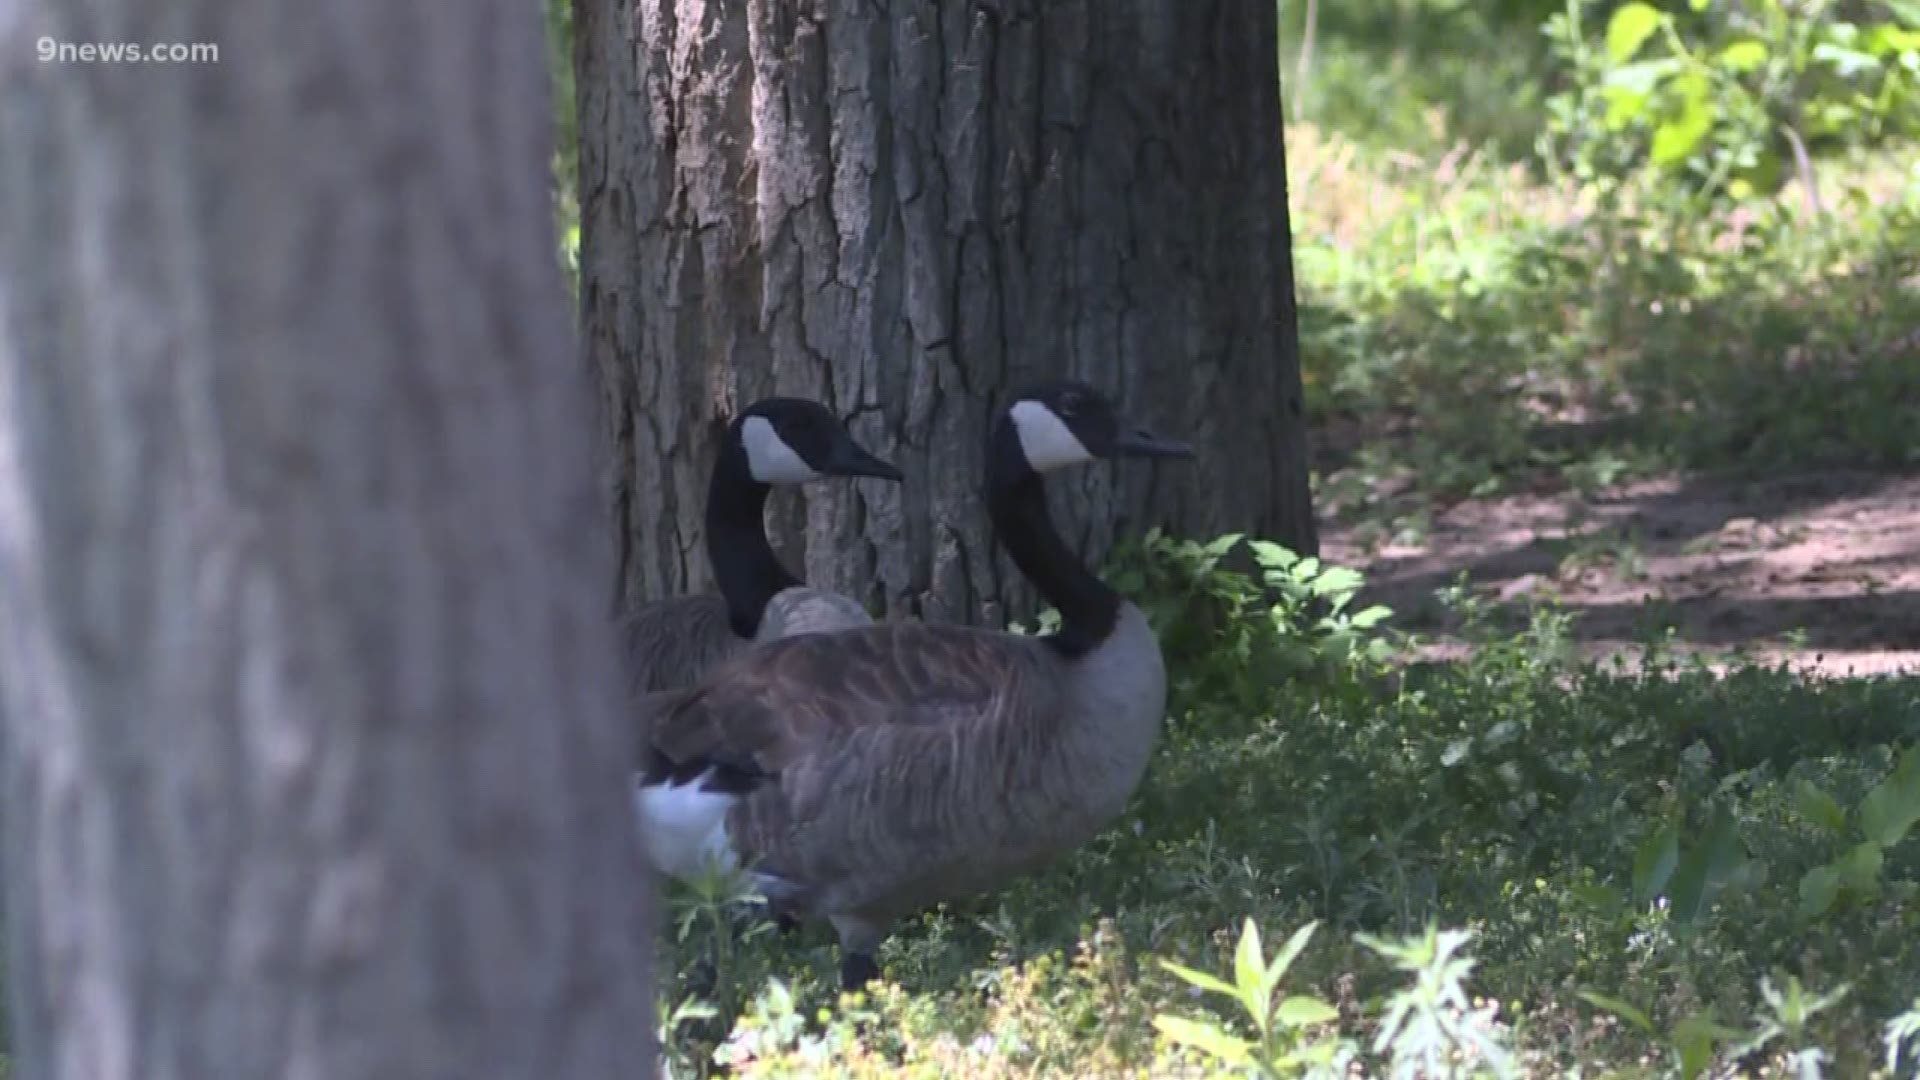 More than 1,600 geese were killed to control the overall population in Denver. The lawsuit says the government violated federal environmental and wildlife policy.